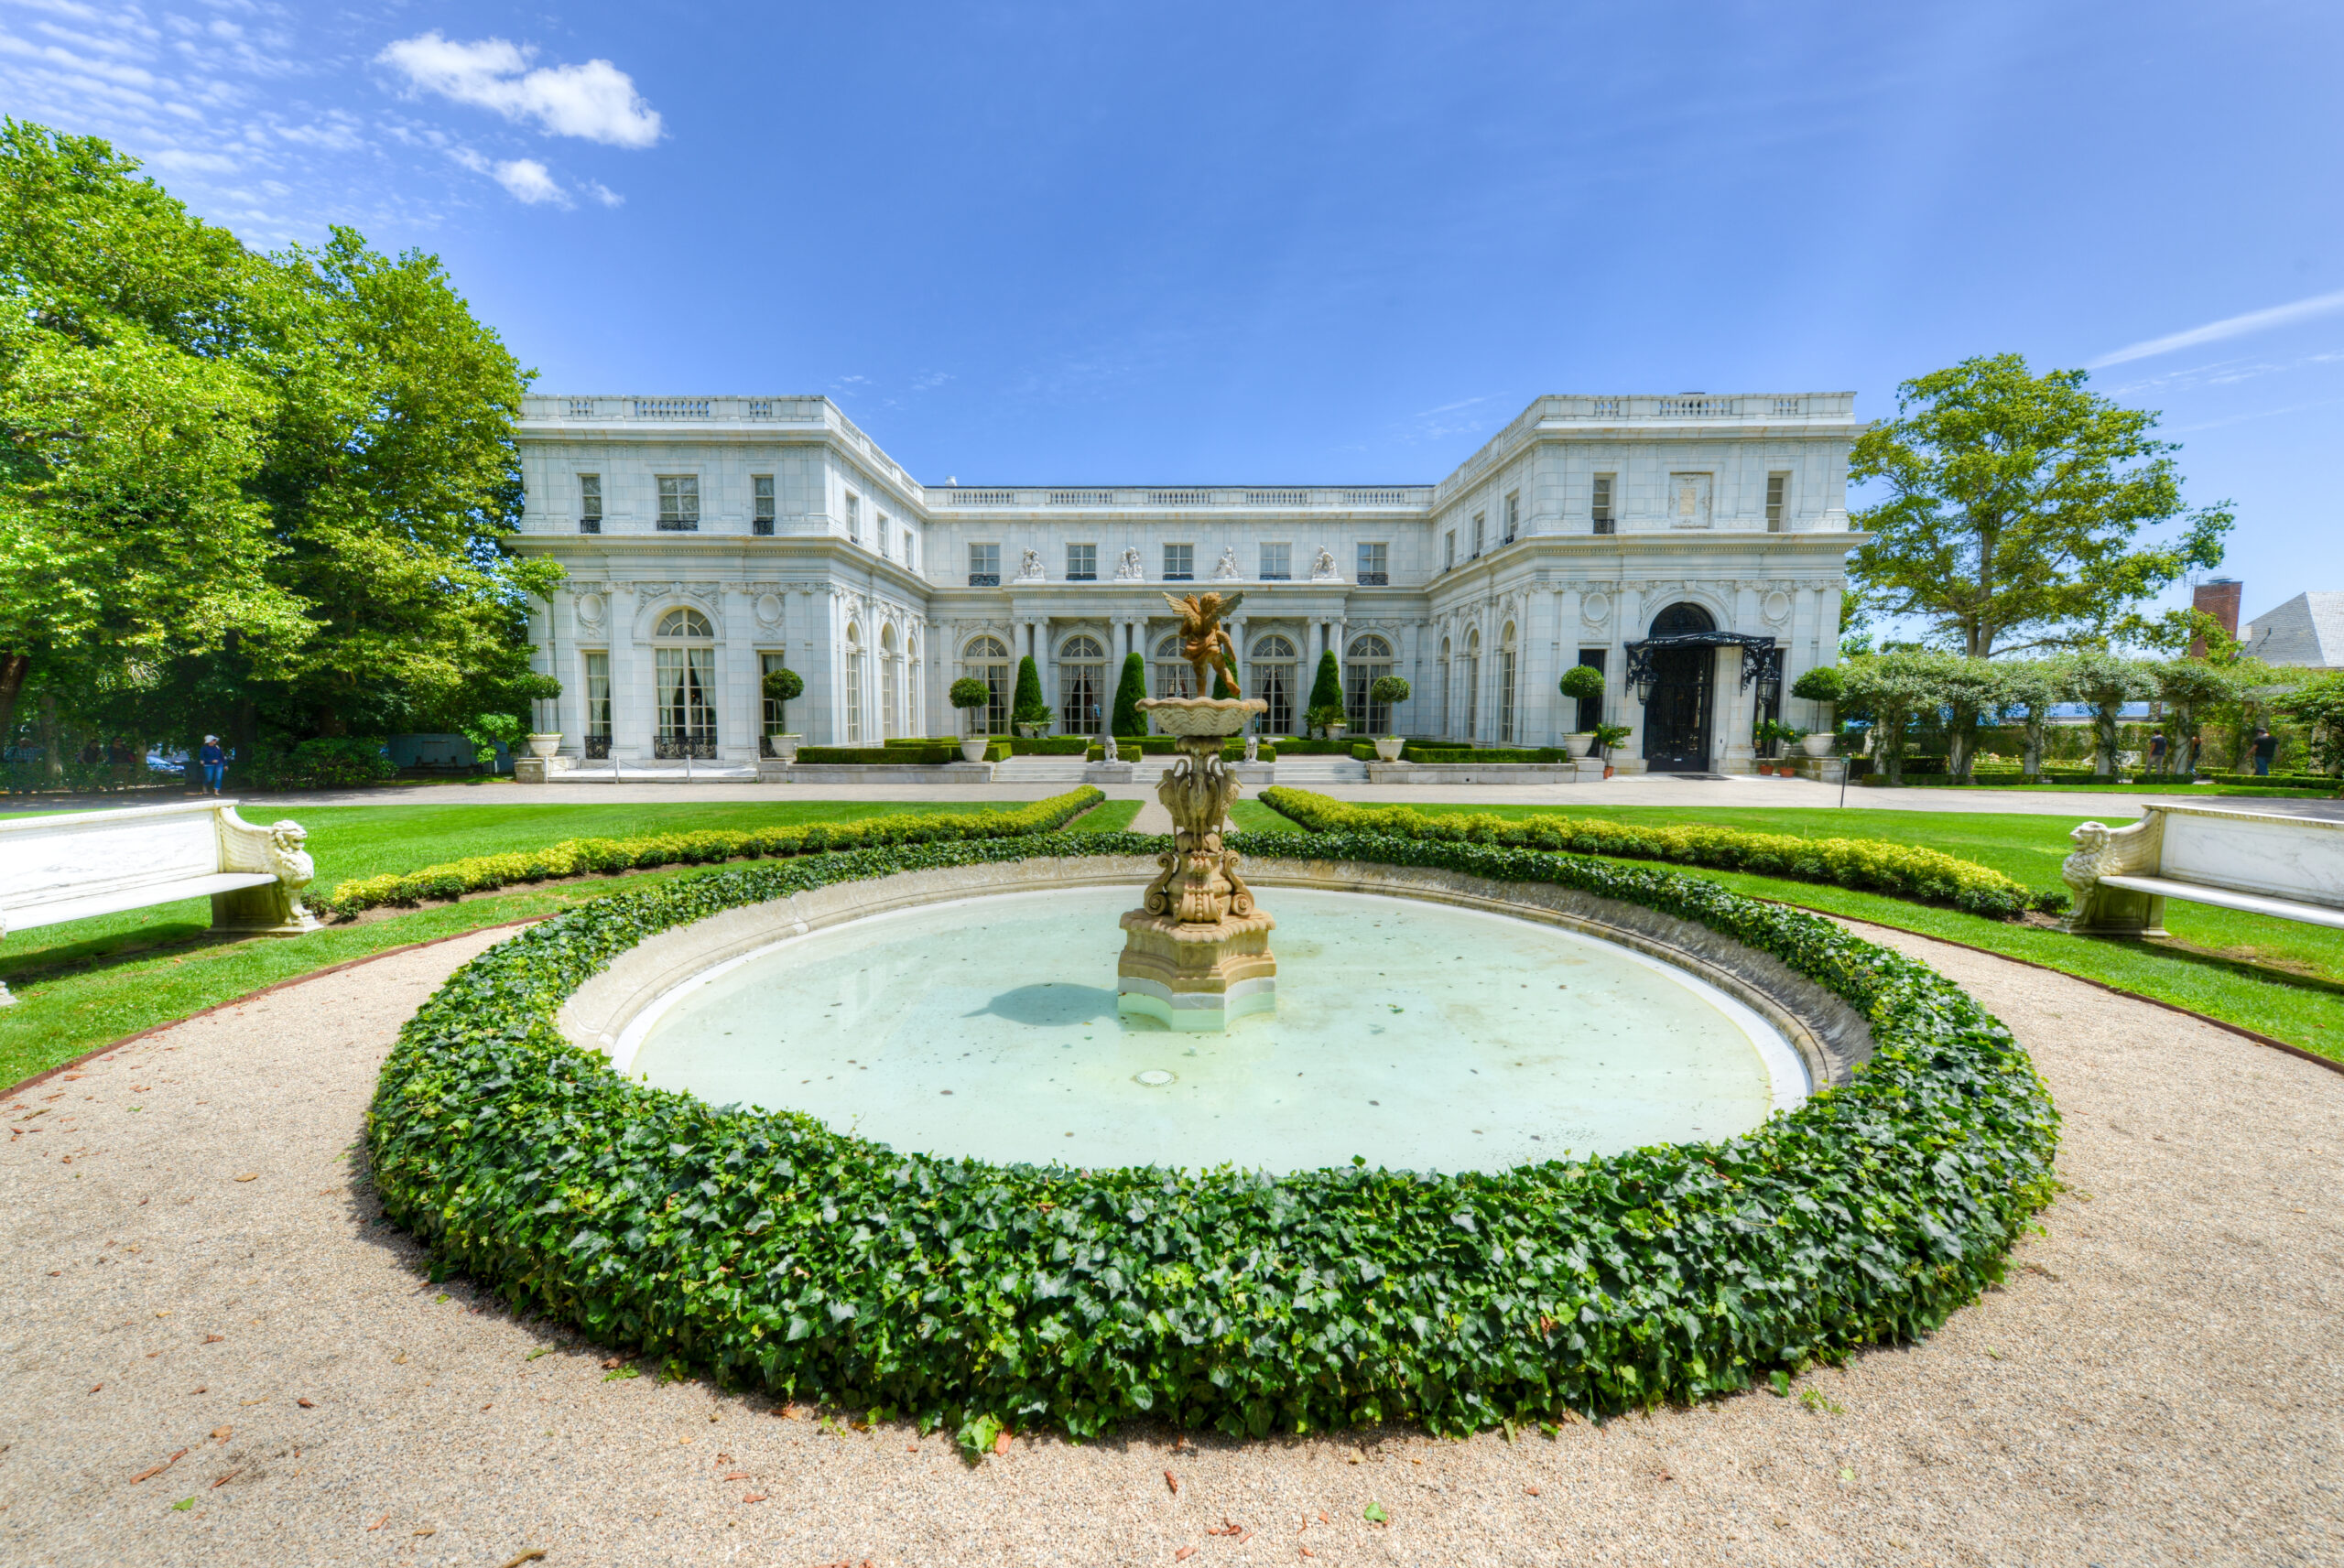 NEWPORT, RHODE ISLAND - AUGUST 1, 2013: Rosecliff. built 1898-1902, is one of the Gilded Age mansions, in Newport, as seen on July 19, 2013. It was modeled after the Grand Trianon of Versailles.